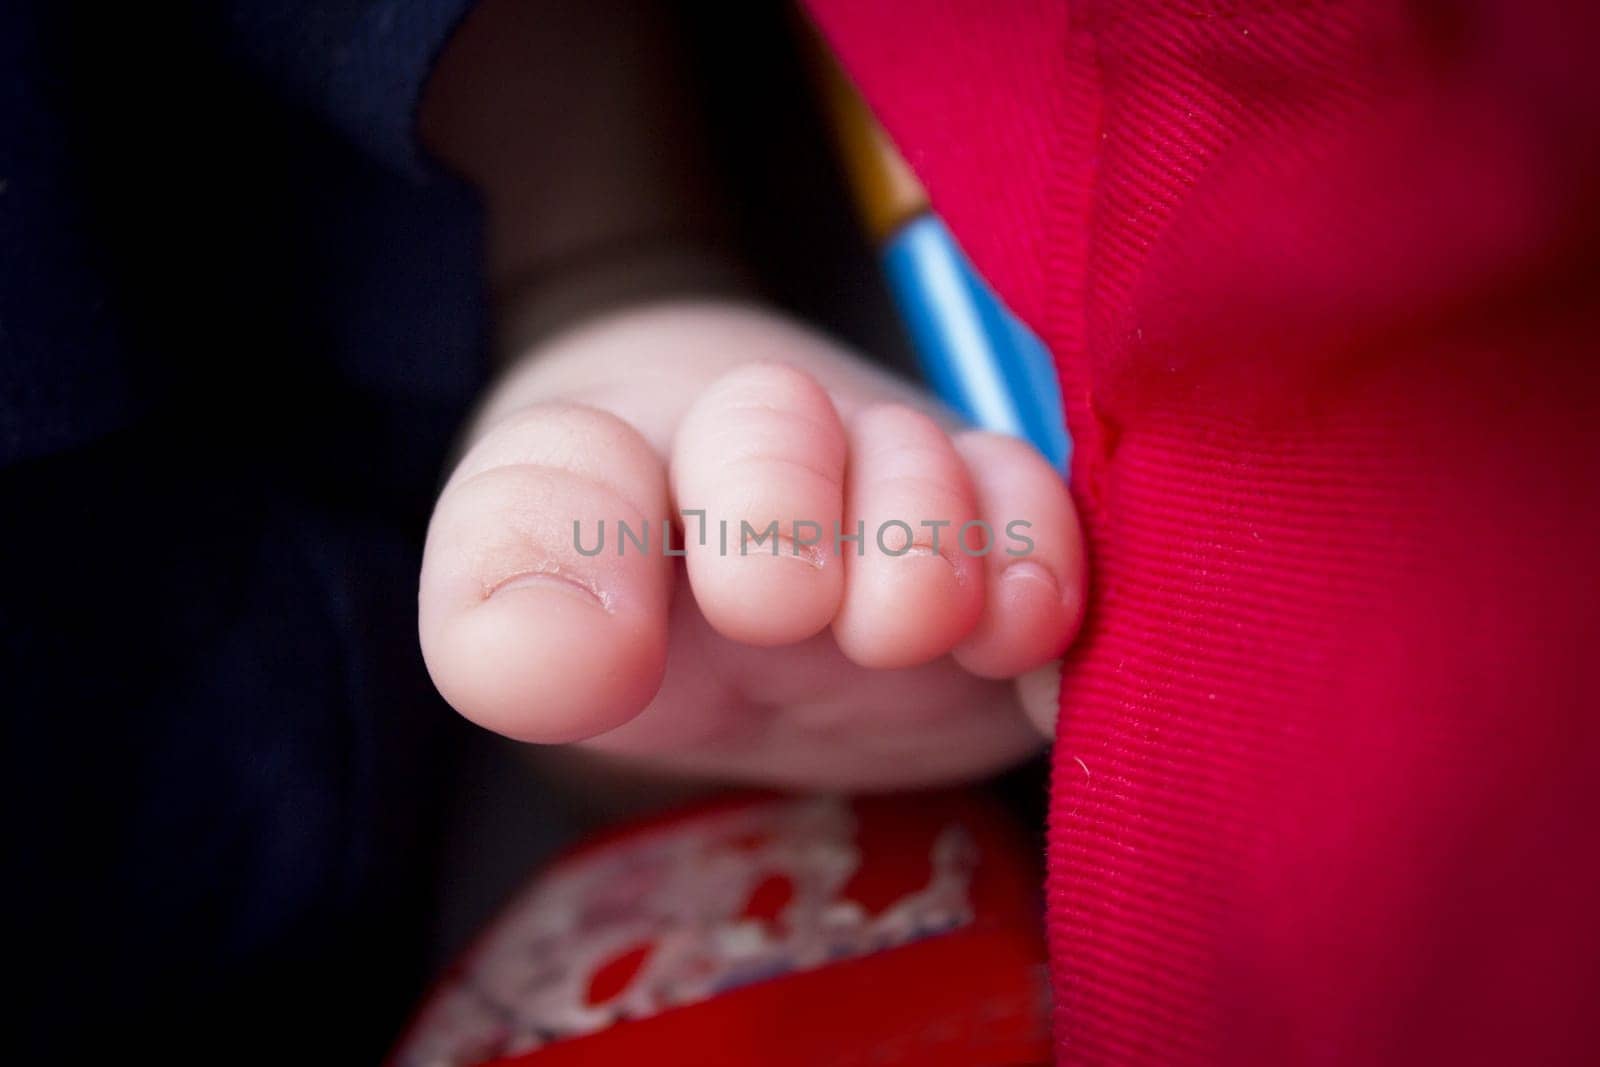 Two month old baby feet on black background by GemaIbarra